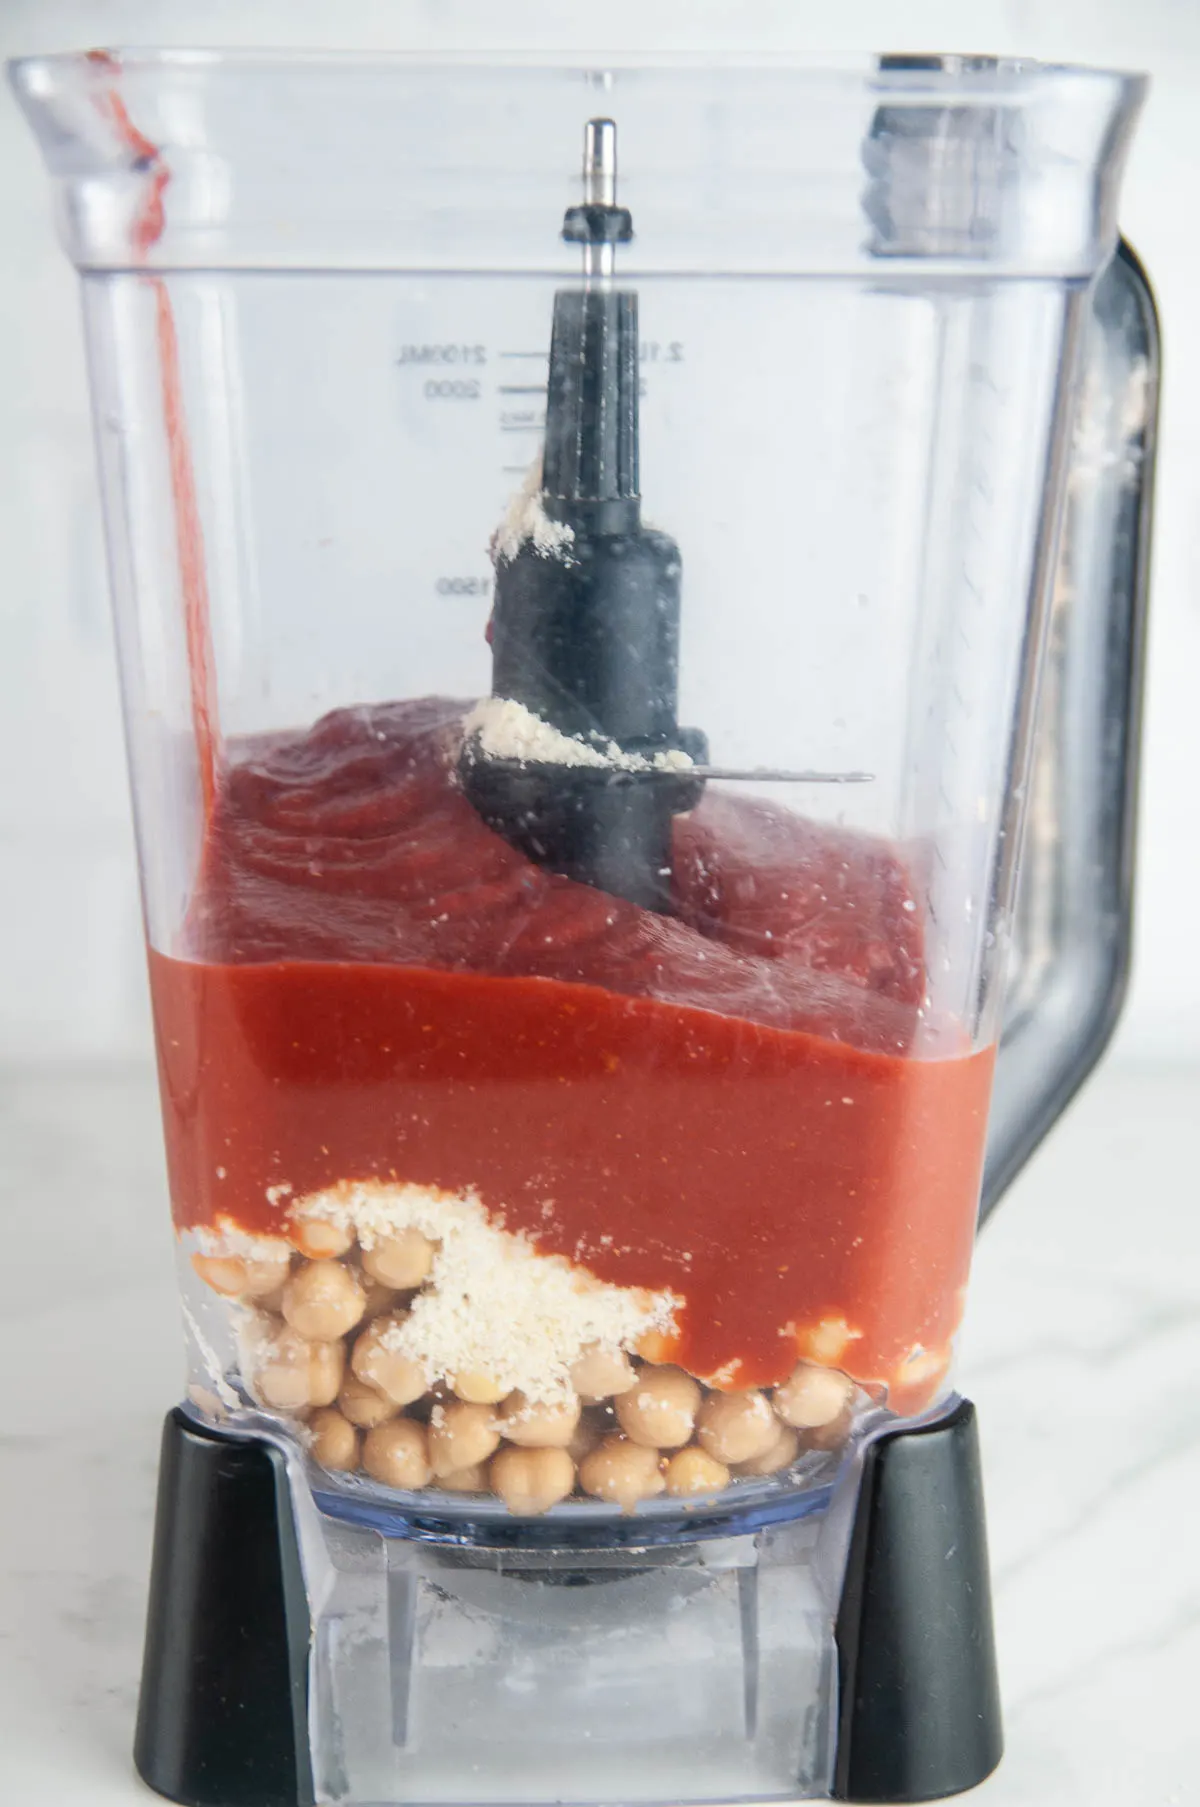 Put the ingredients for chickpea sauce in a blender.